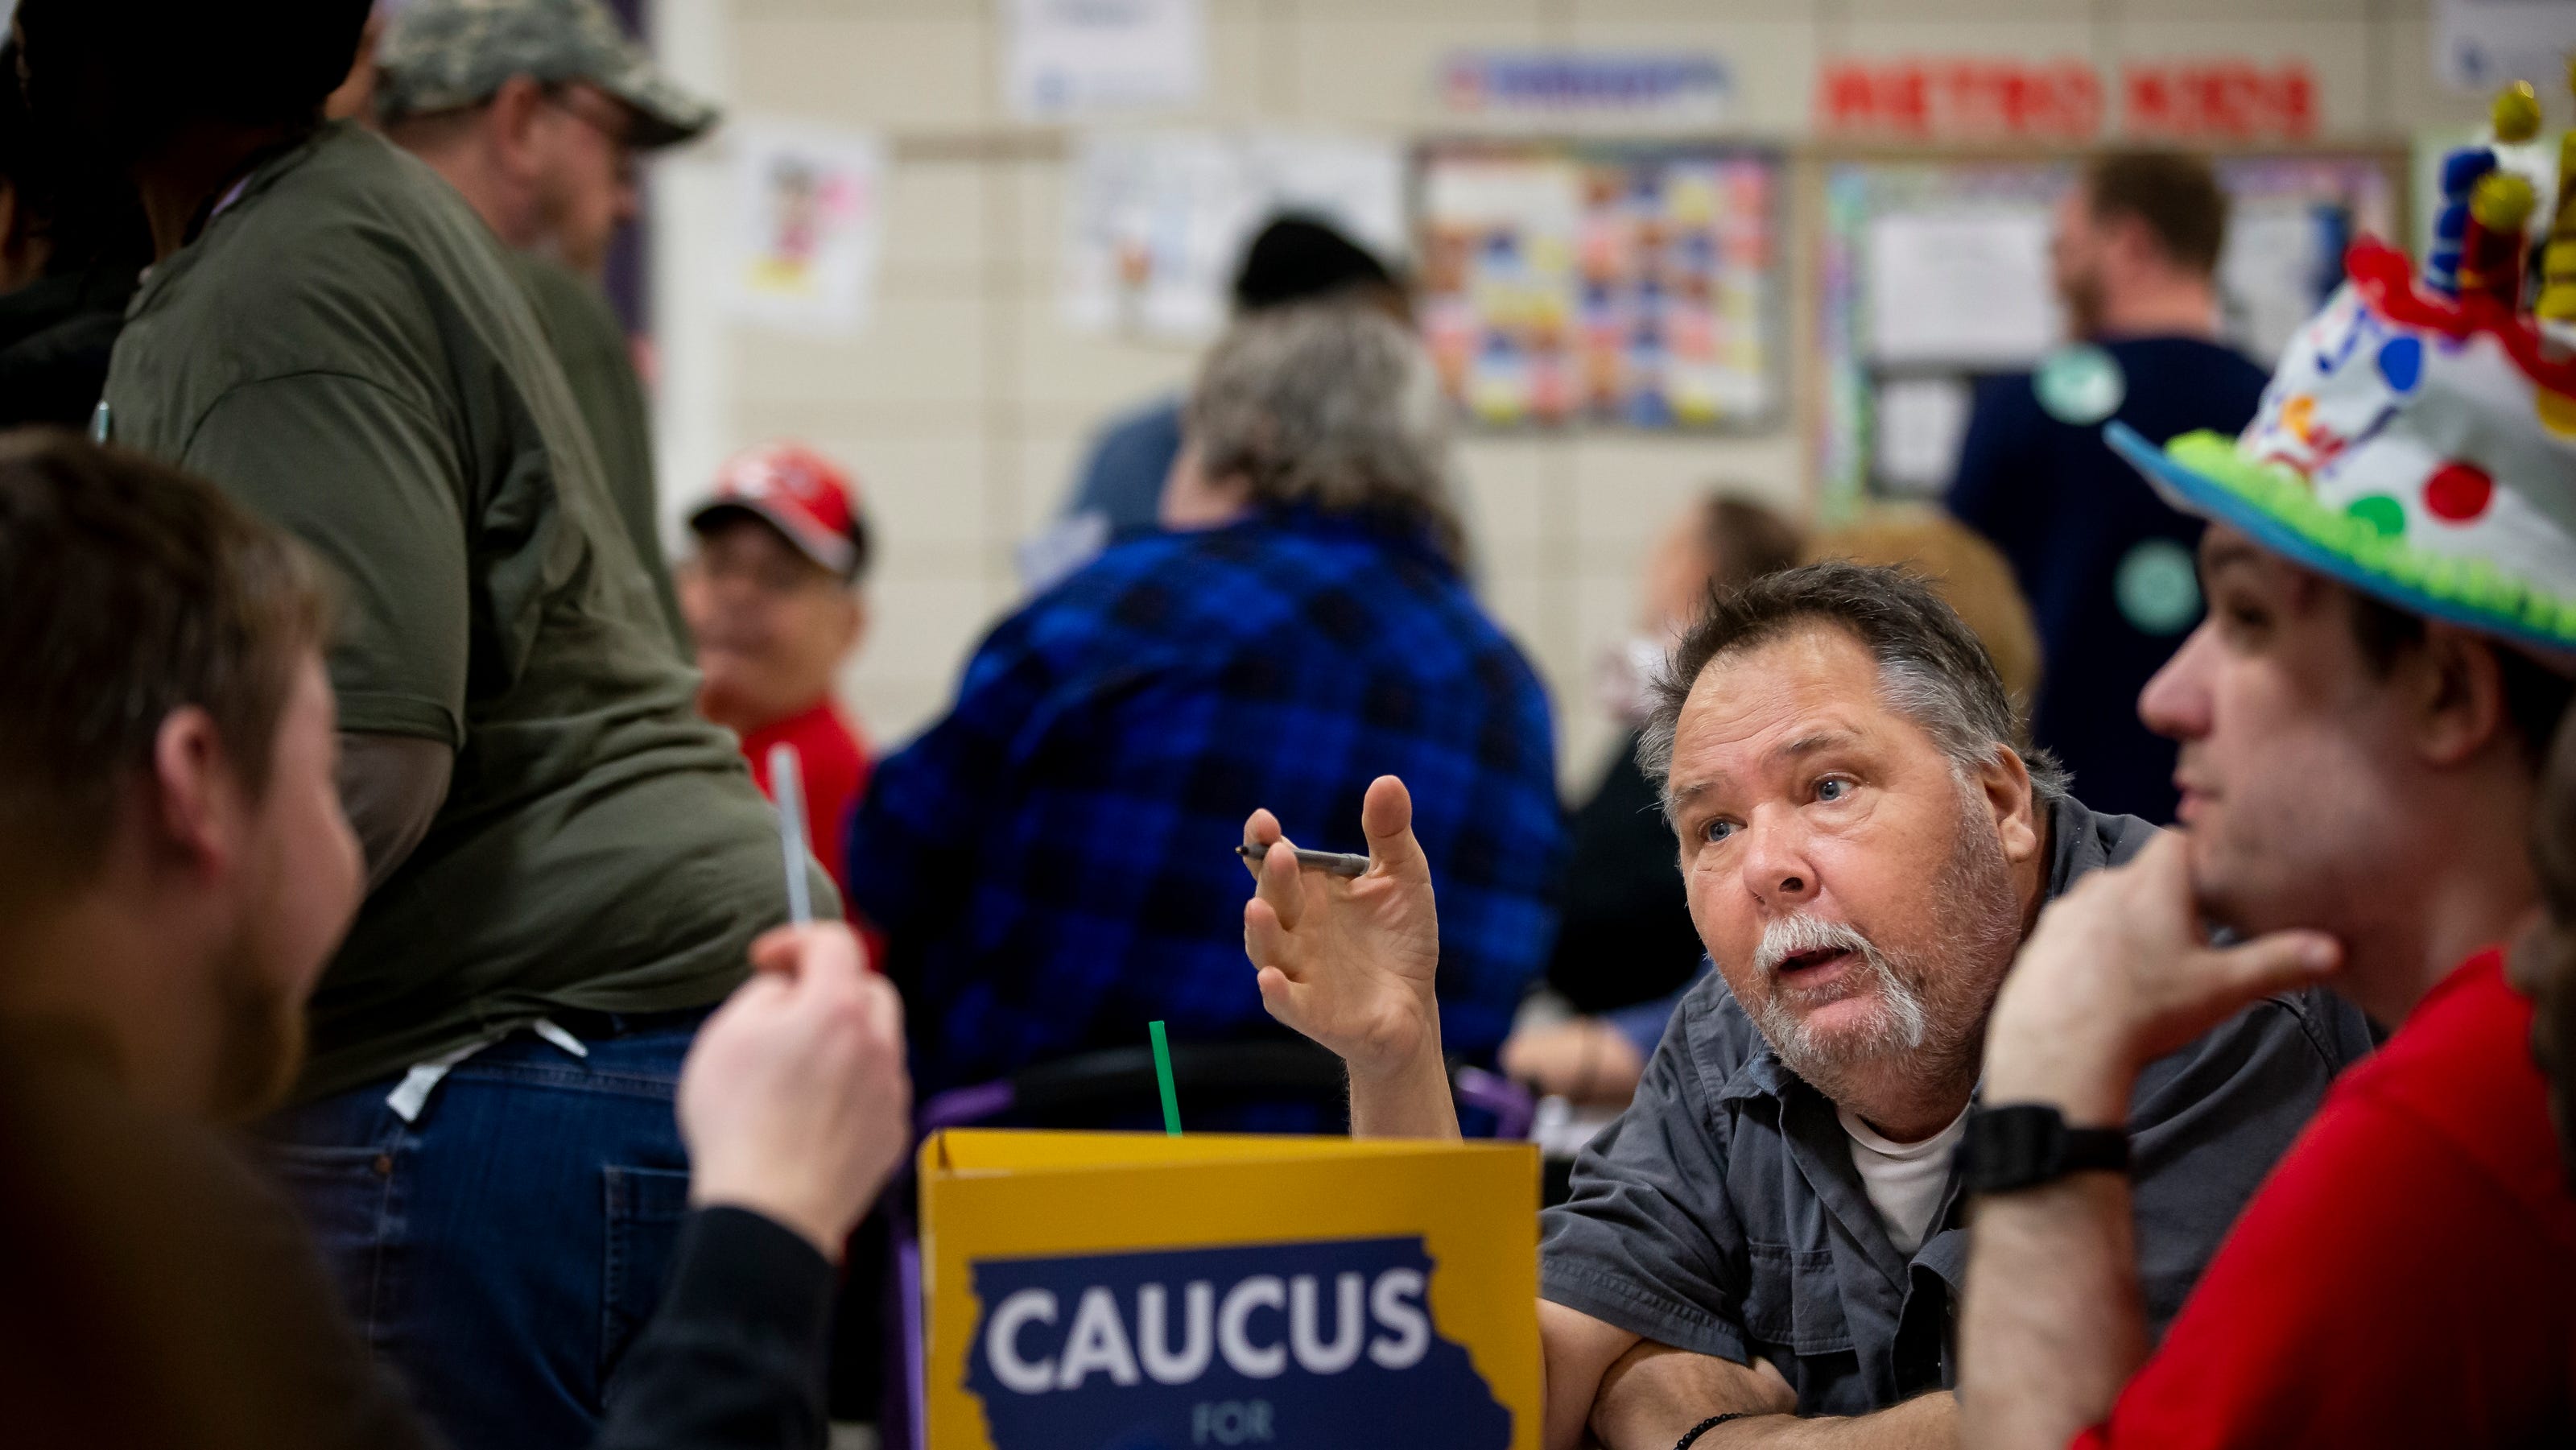 Iowa caucuses A year after collapse, stage set to decide their future